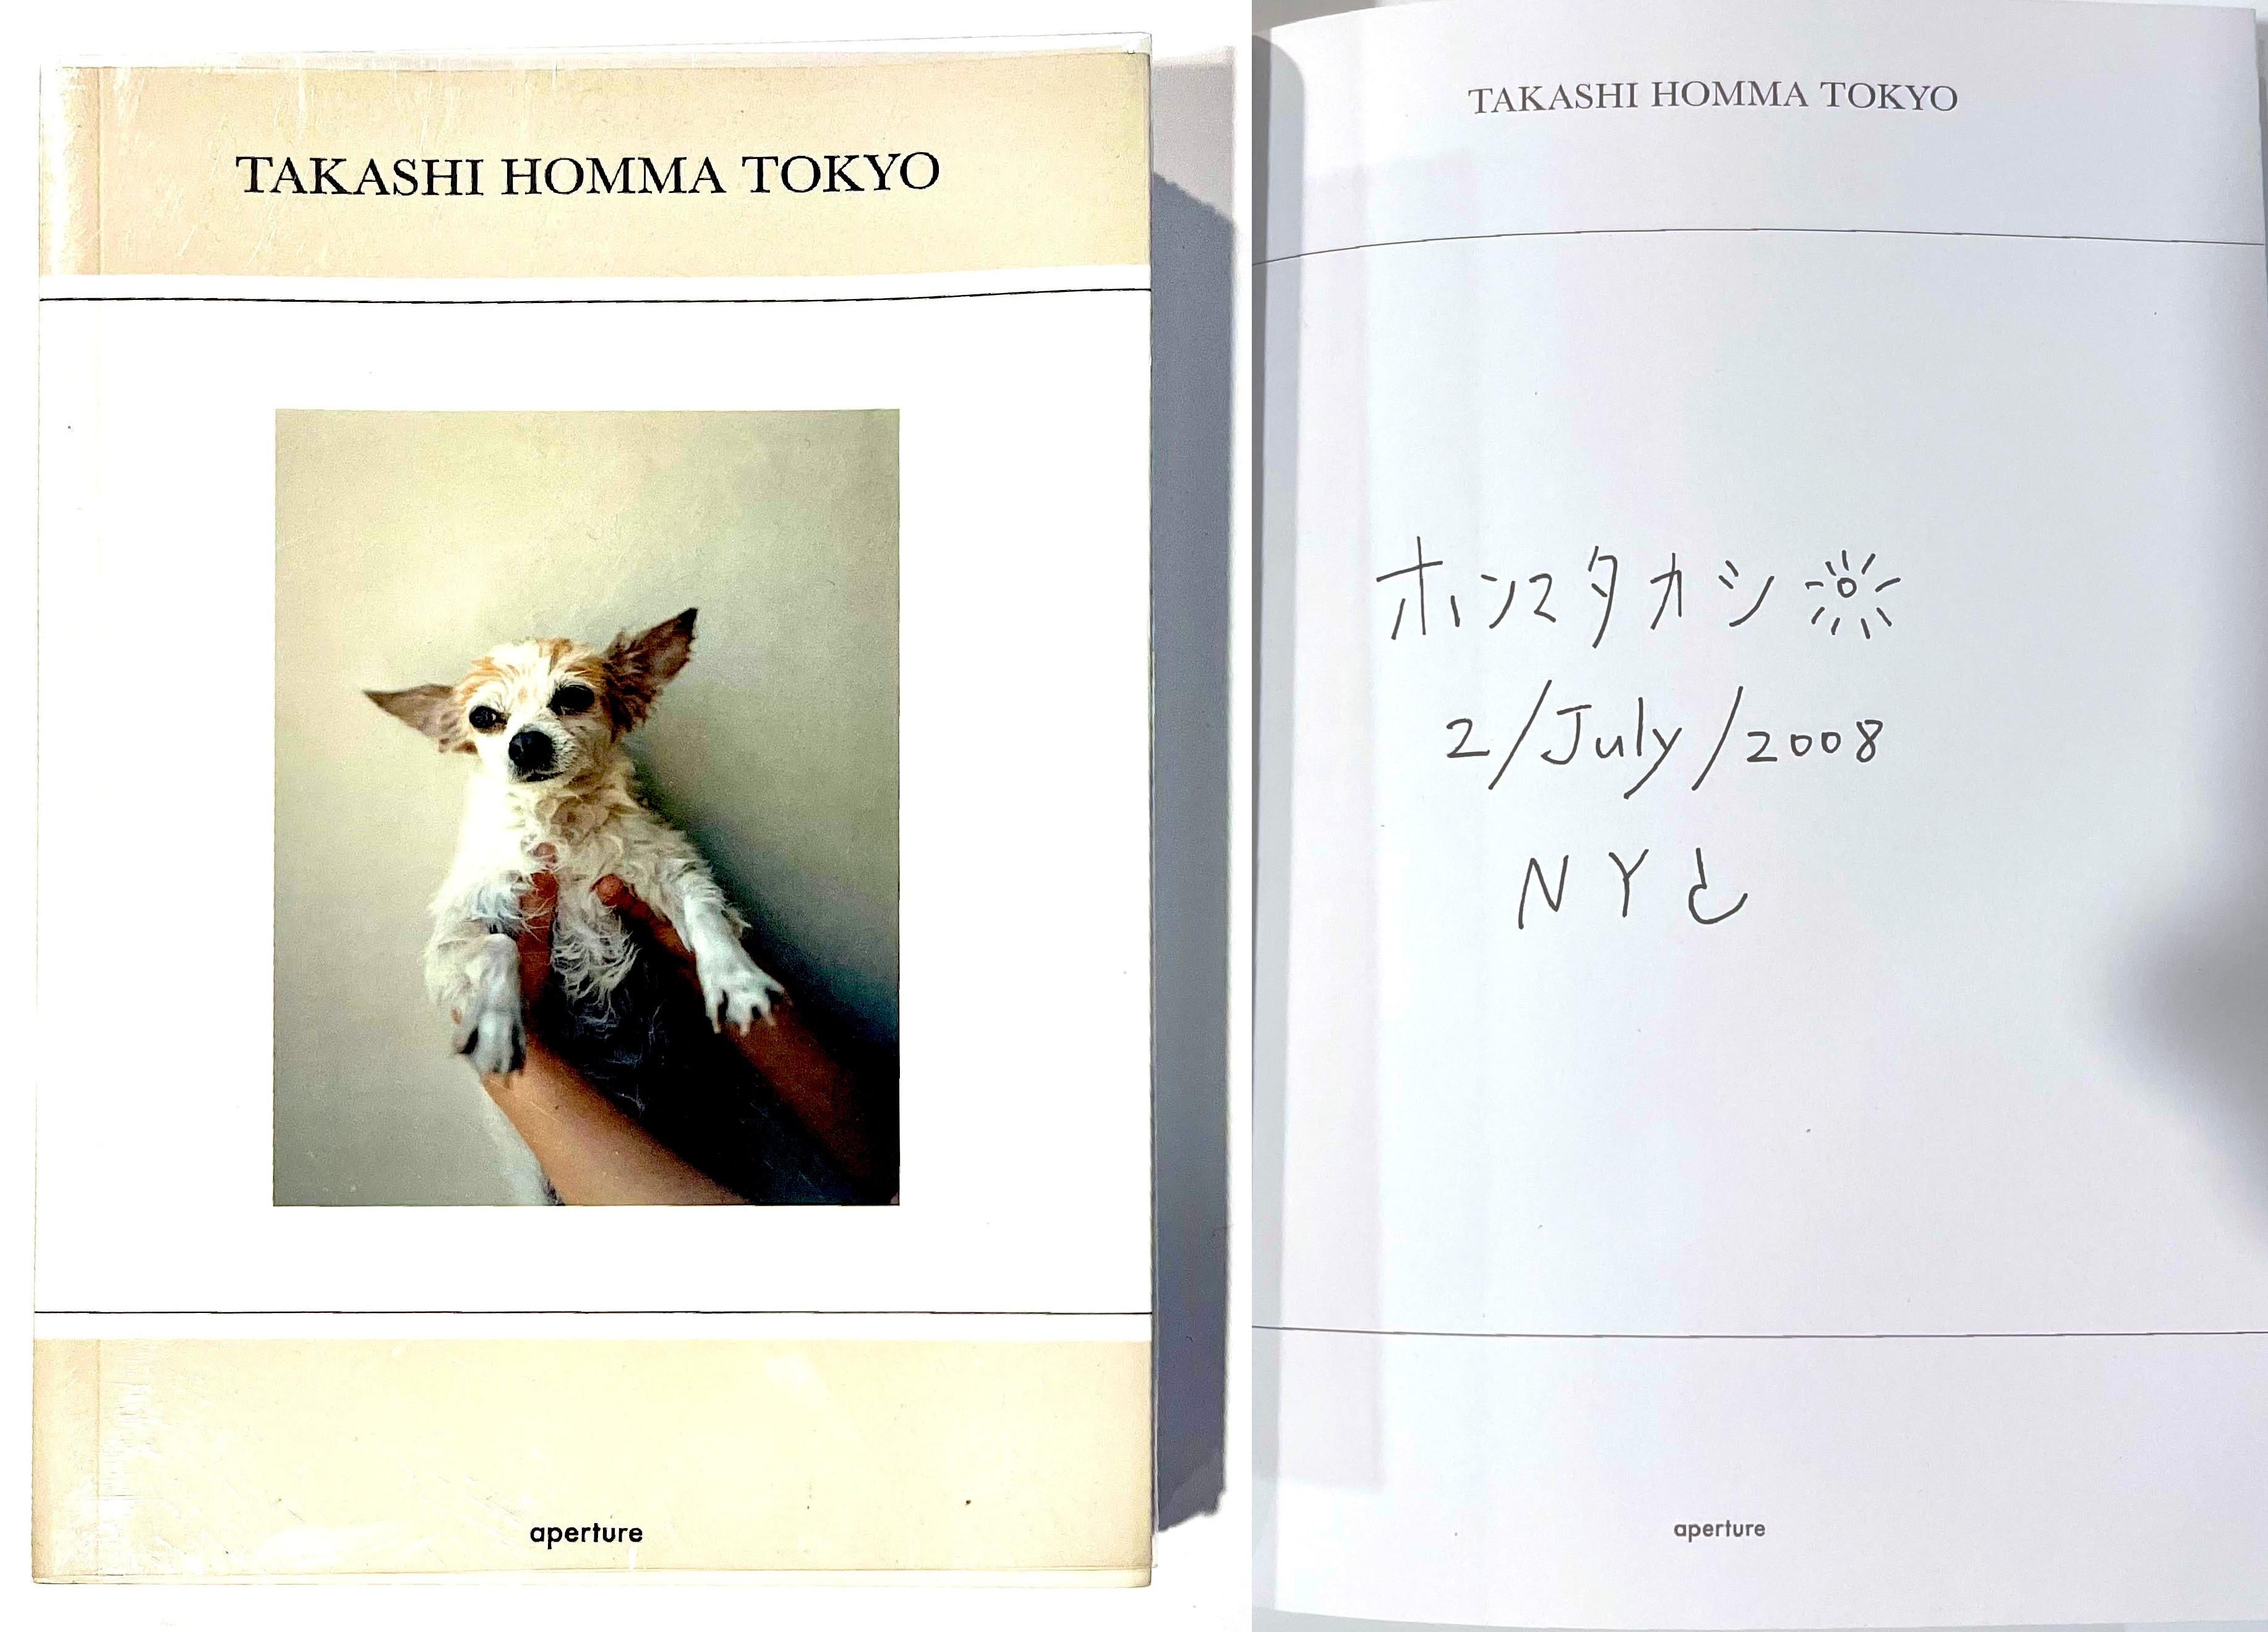 Takashi Homma Tokyo monograph, hand signed, inscribed and dated by Takashi Homma